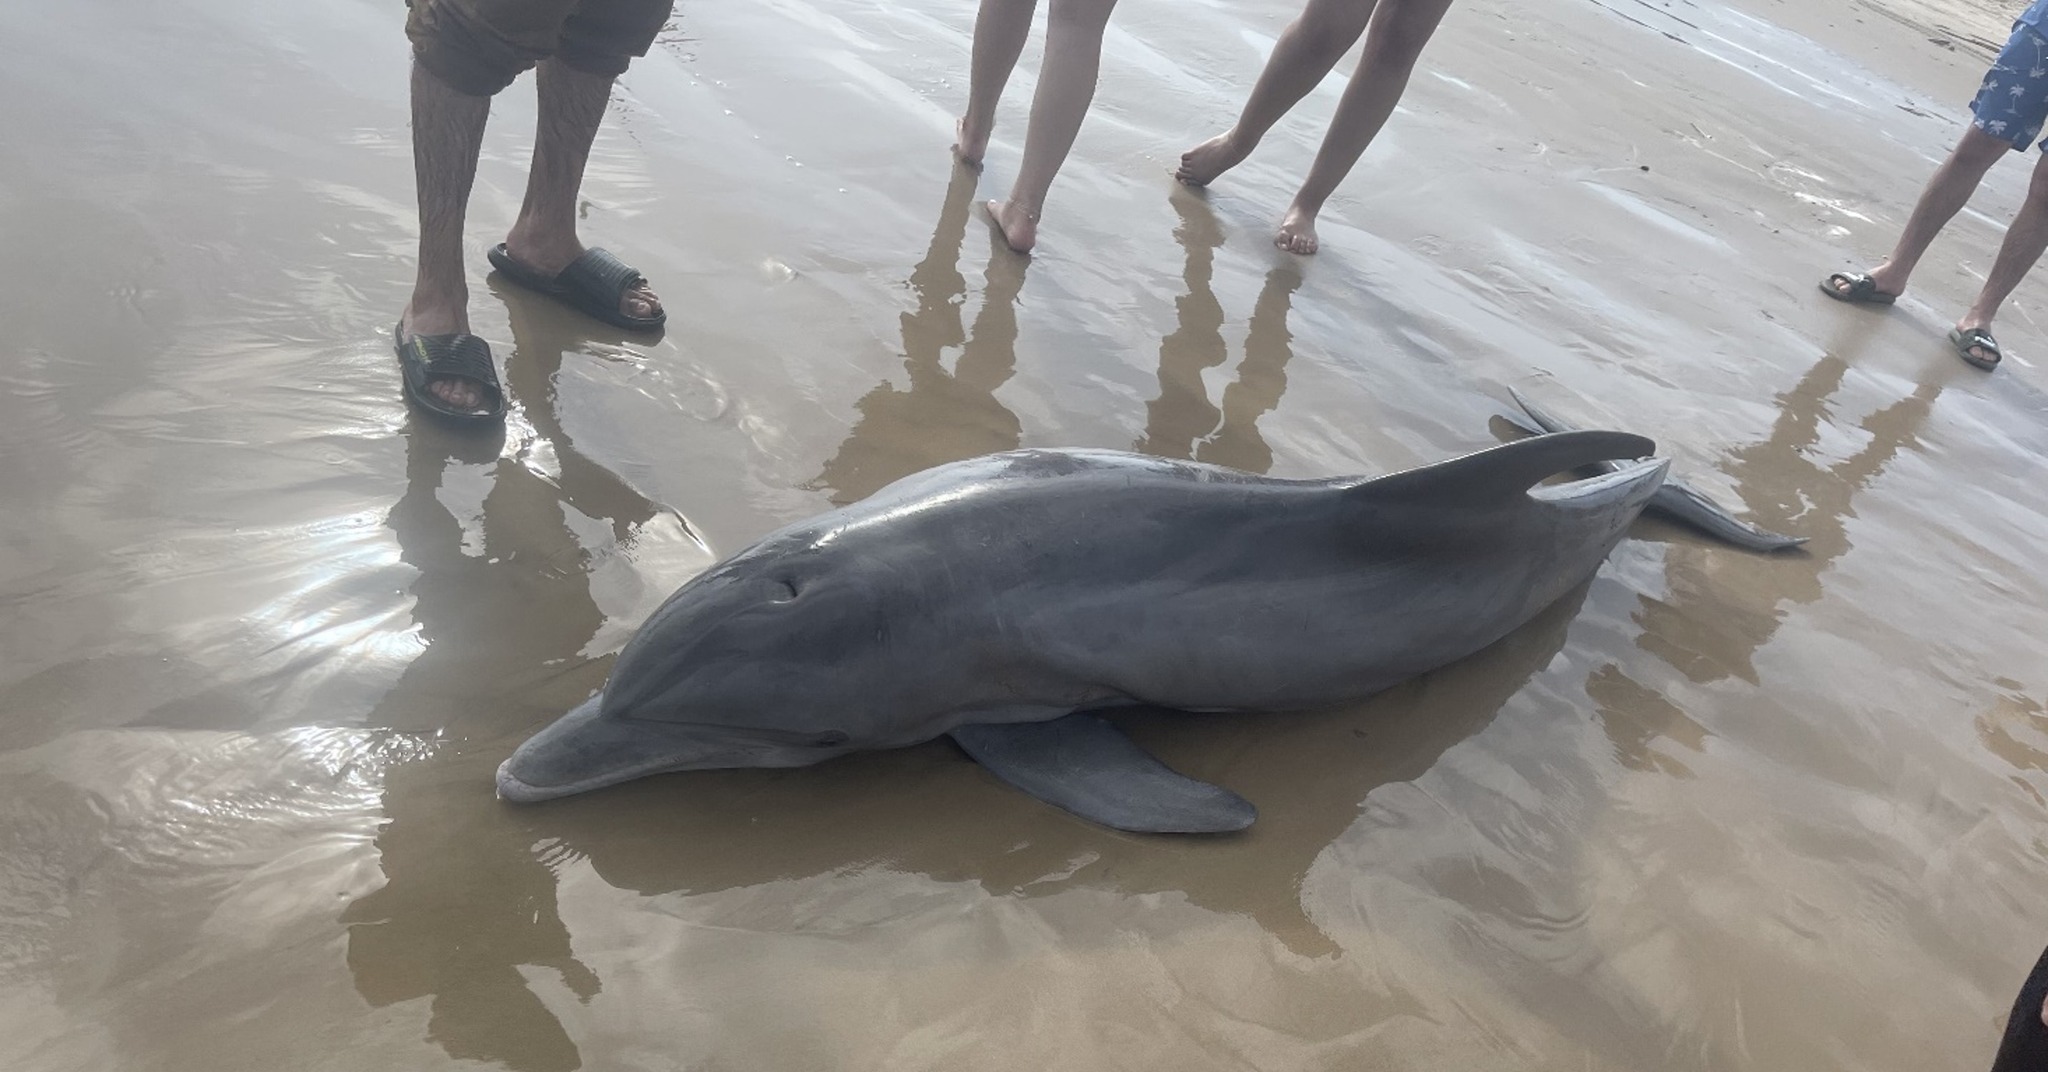 Dolphin dies on Brazoria County beach after beachgoers try to ride it, officials say